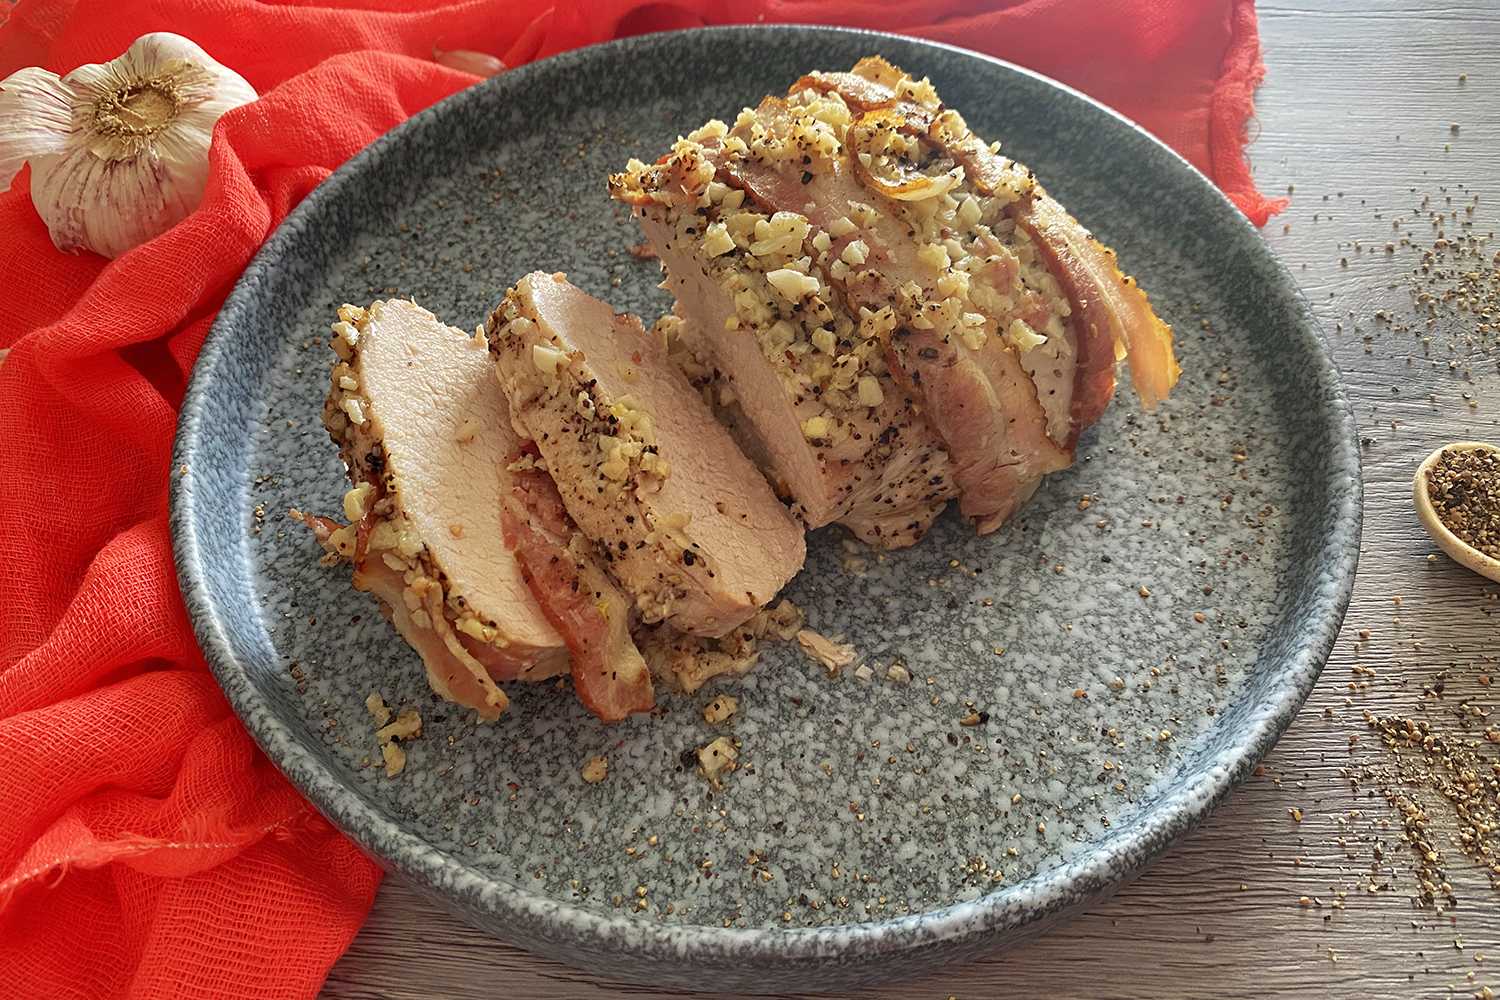 Pork loin slices topped with minced garlic and ground black pepper on a gray plate